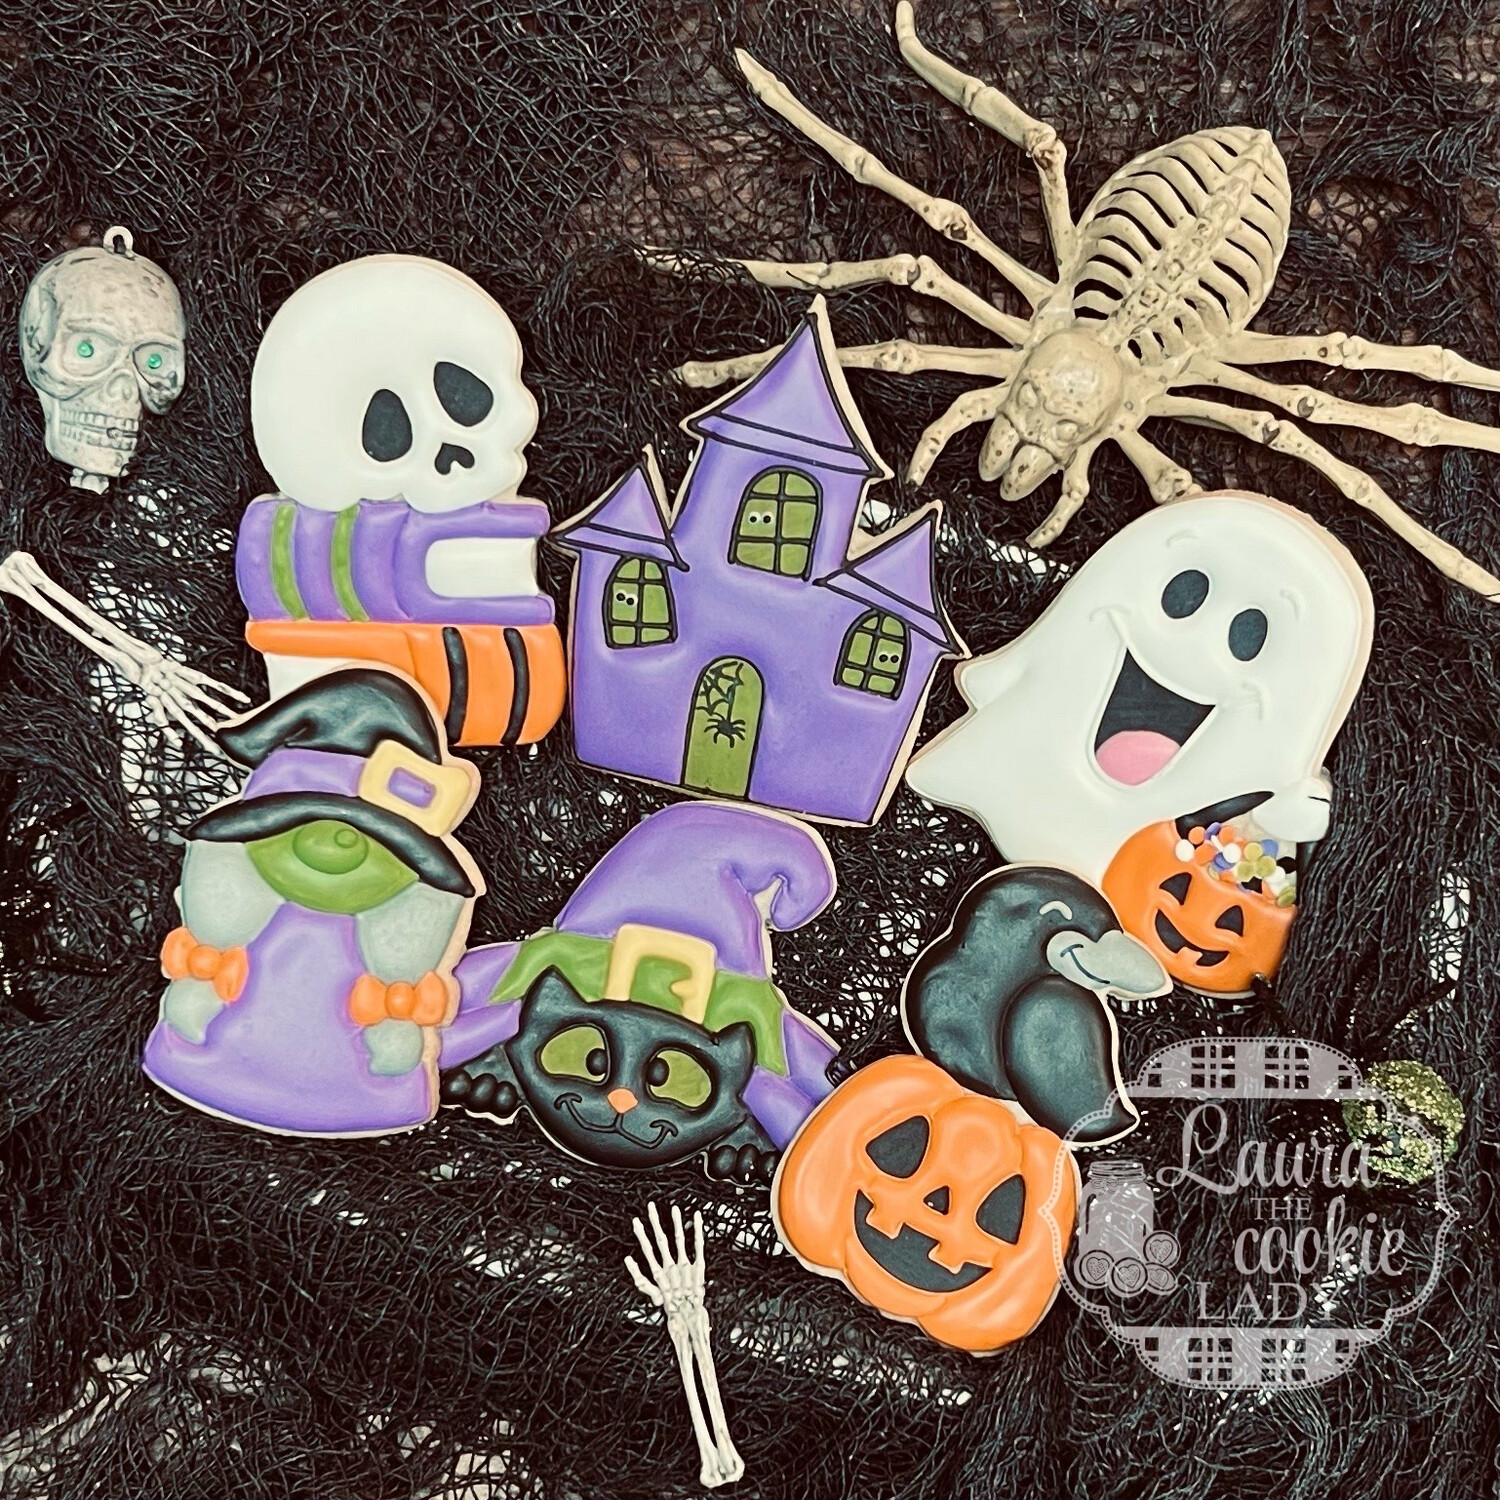 Halloween Cookie Decorating Class Friday 10/7 6pm